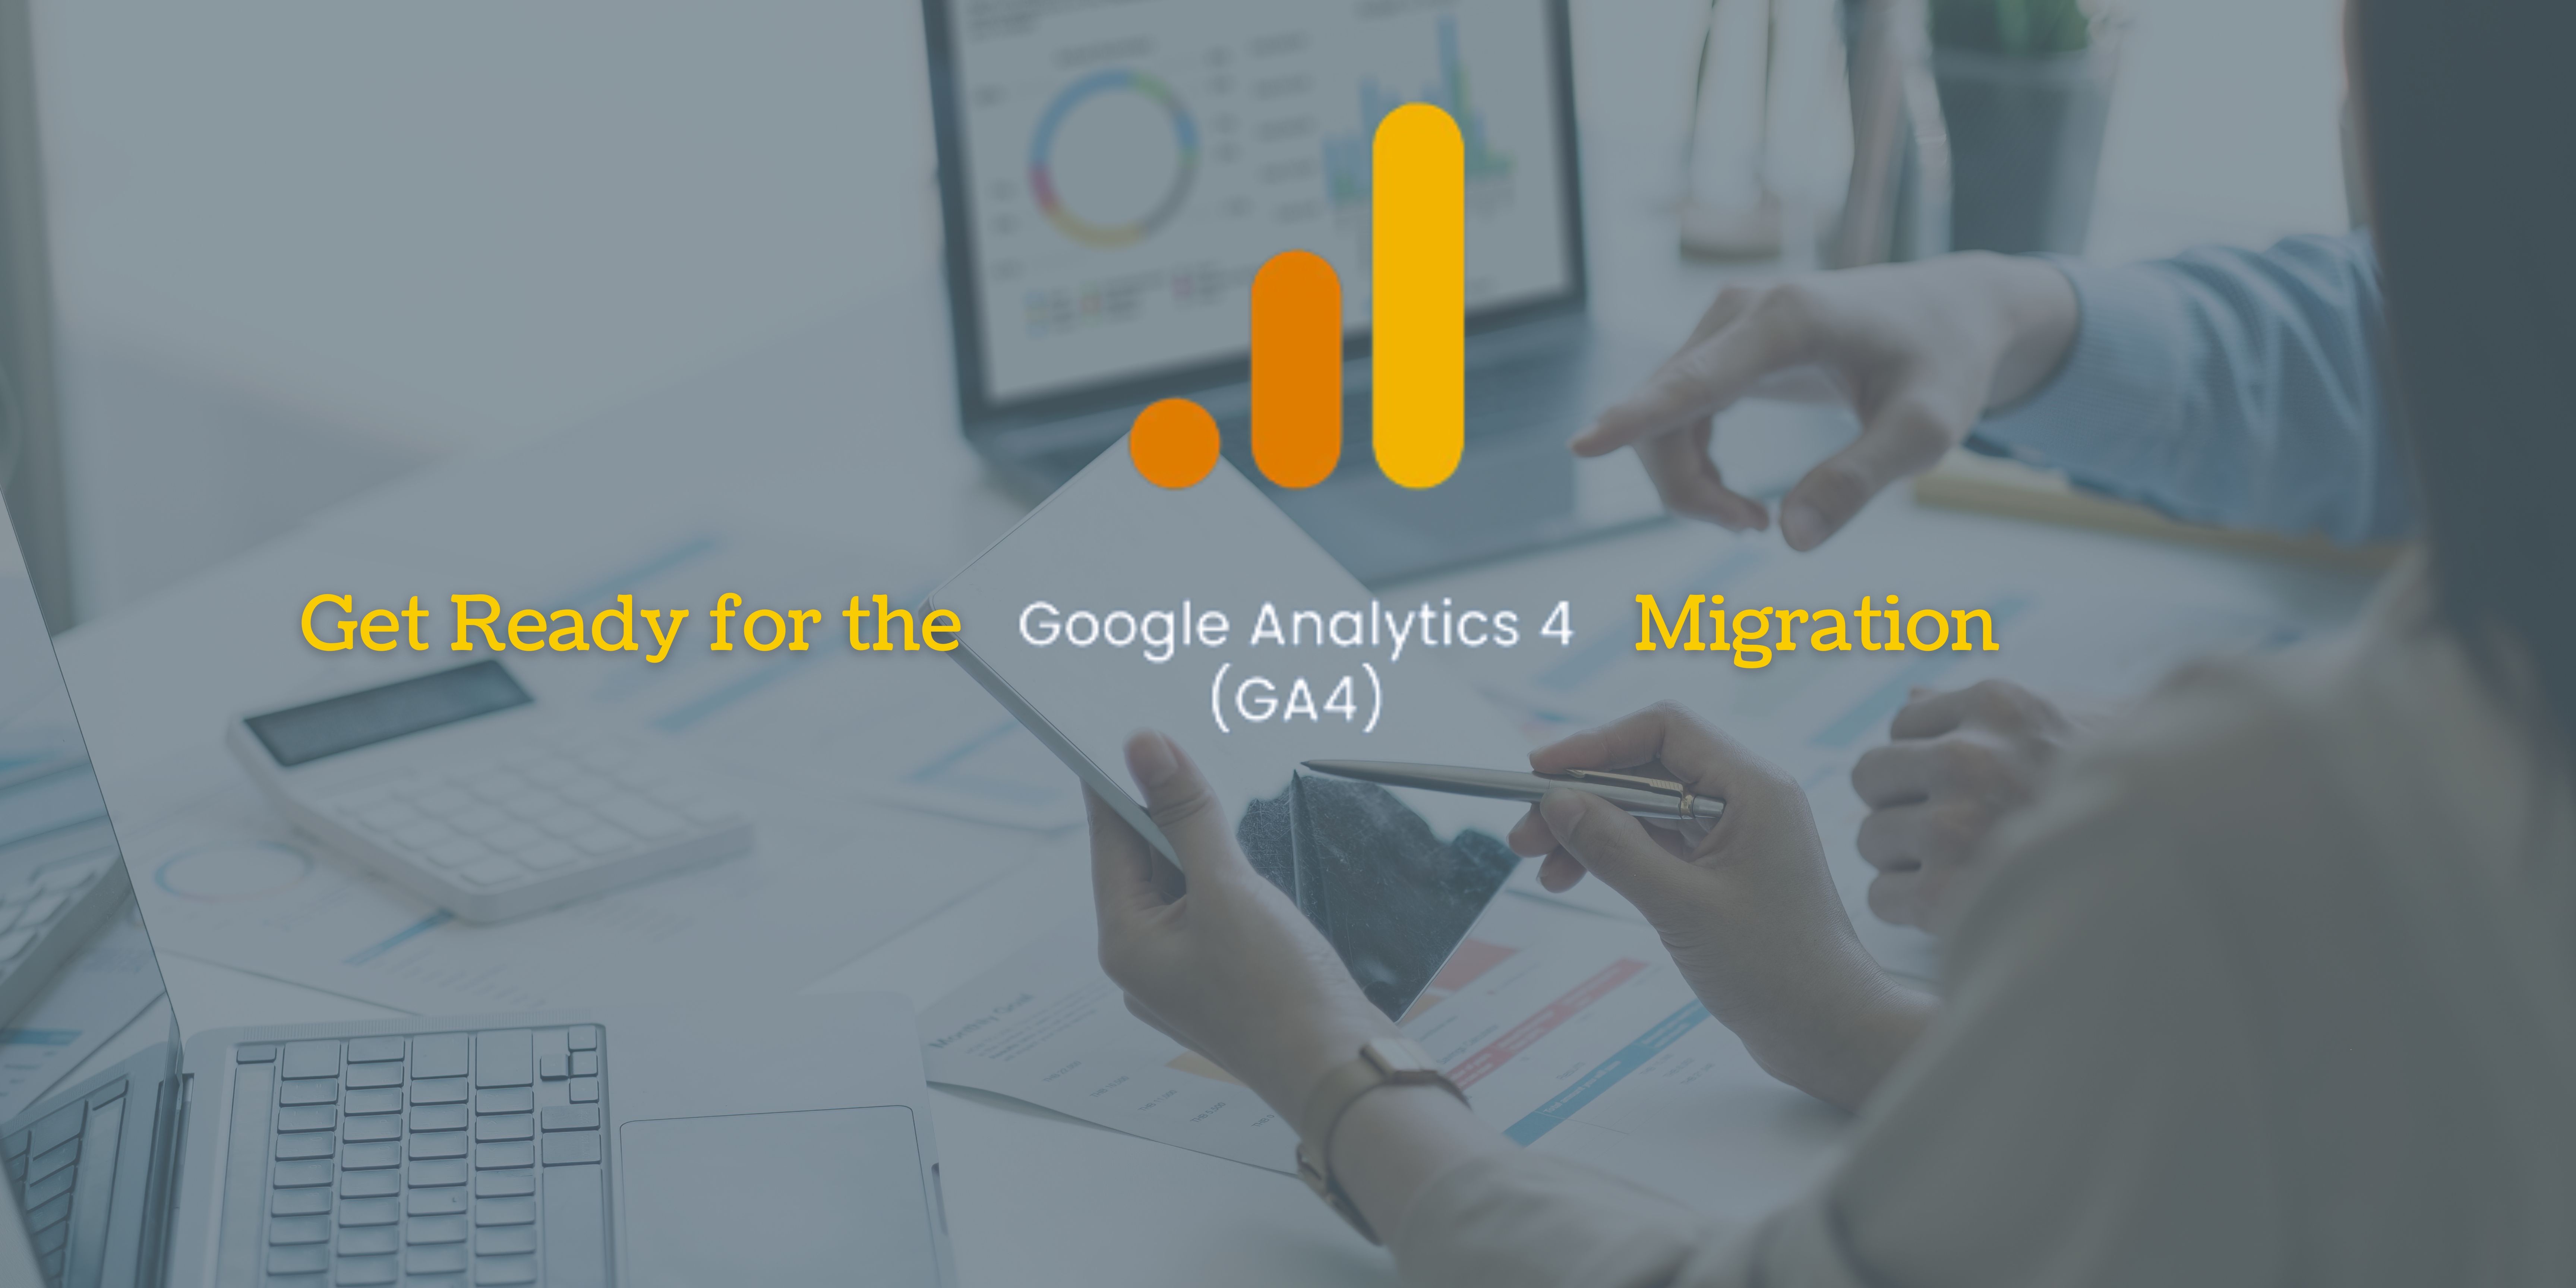 Get Ready for the Google Analytics 4 (GA4) Migration